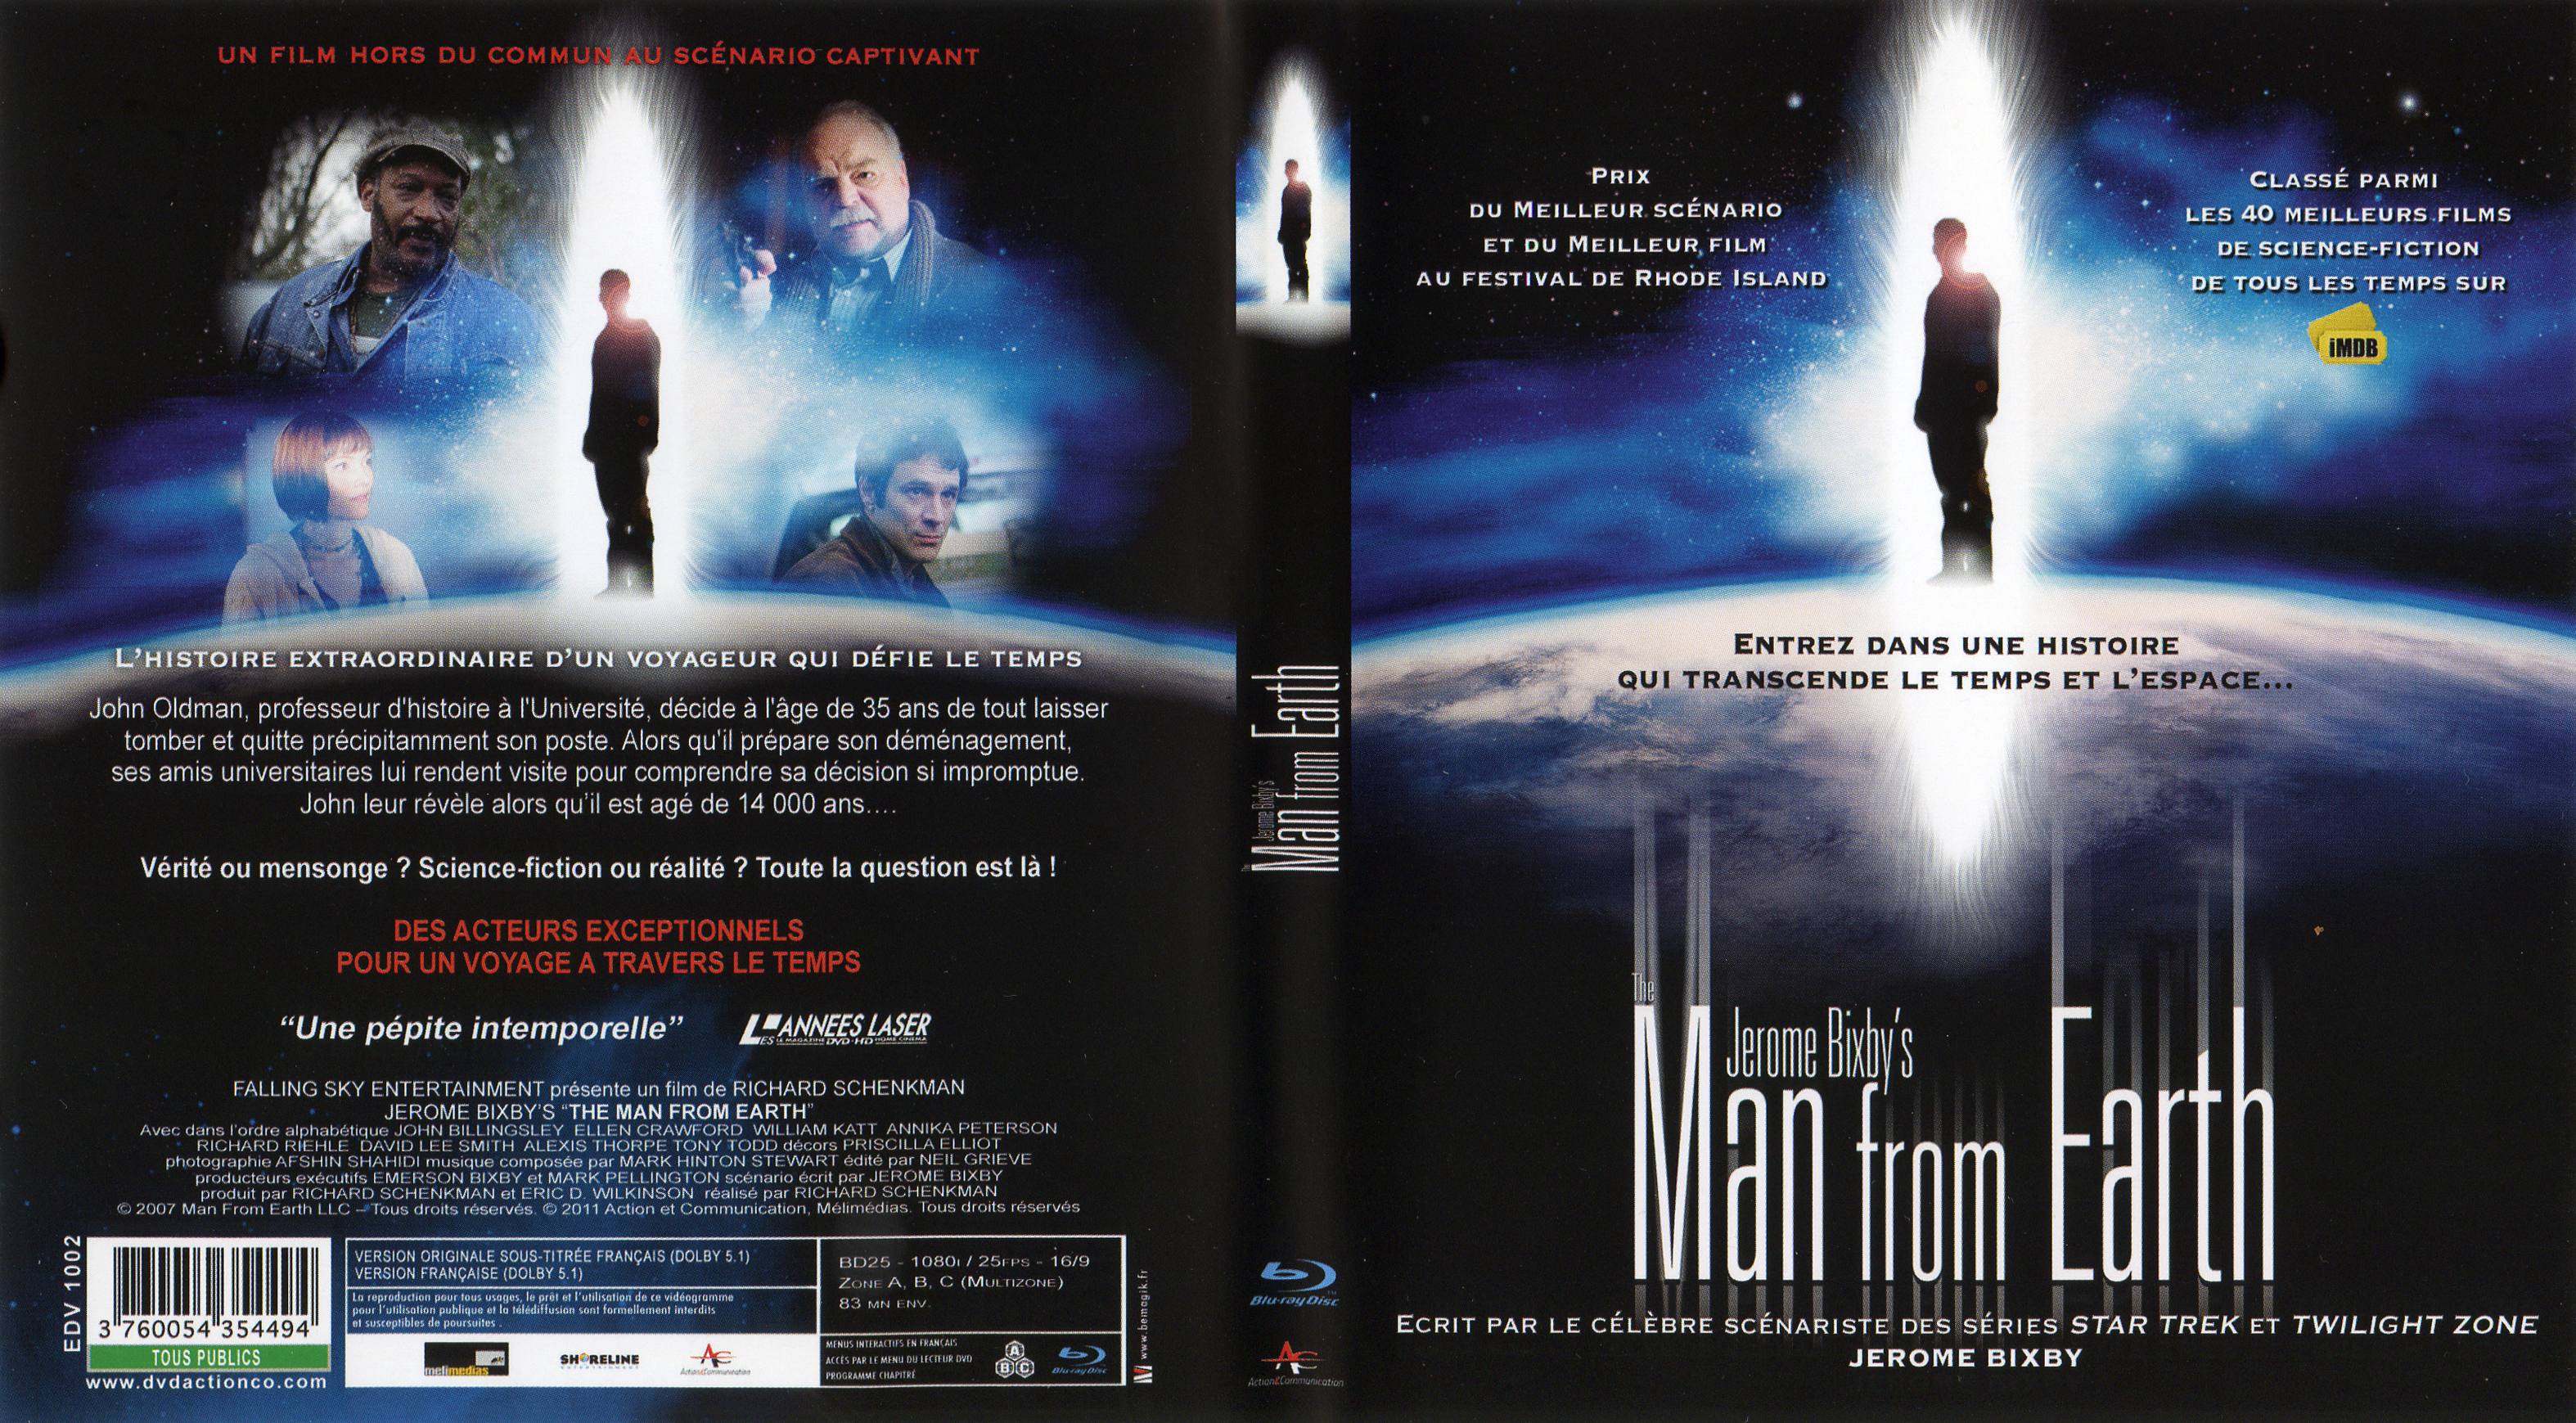 Jaquette DVD Man from earth (BLU-RAY)